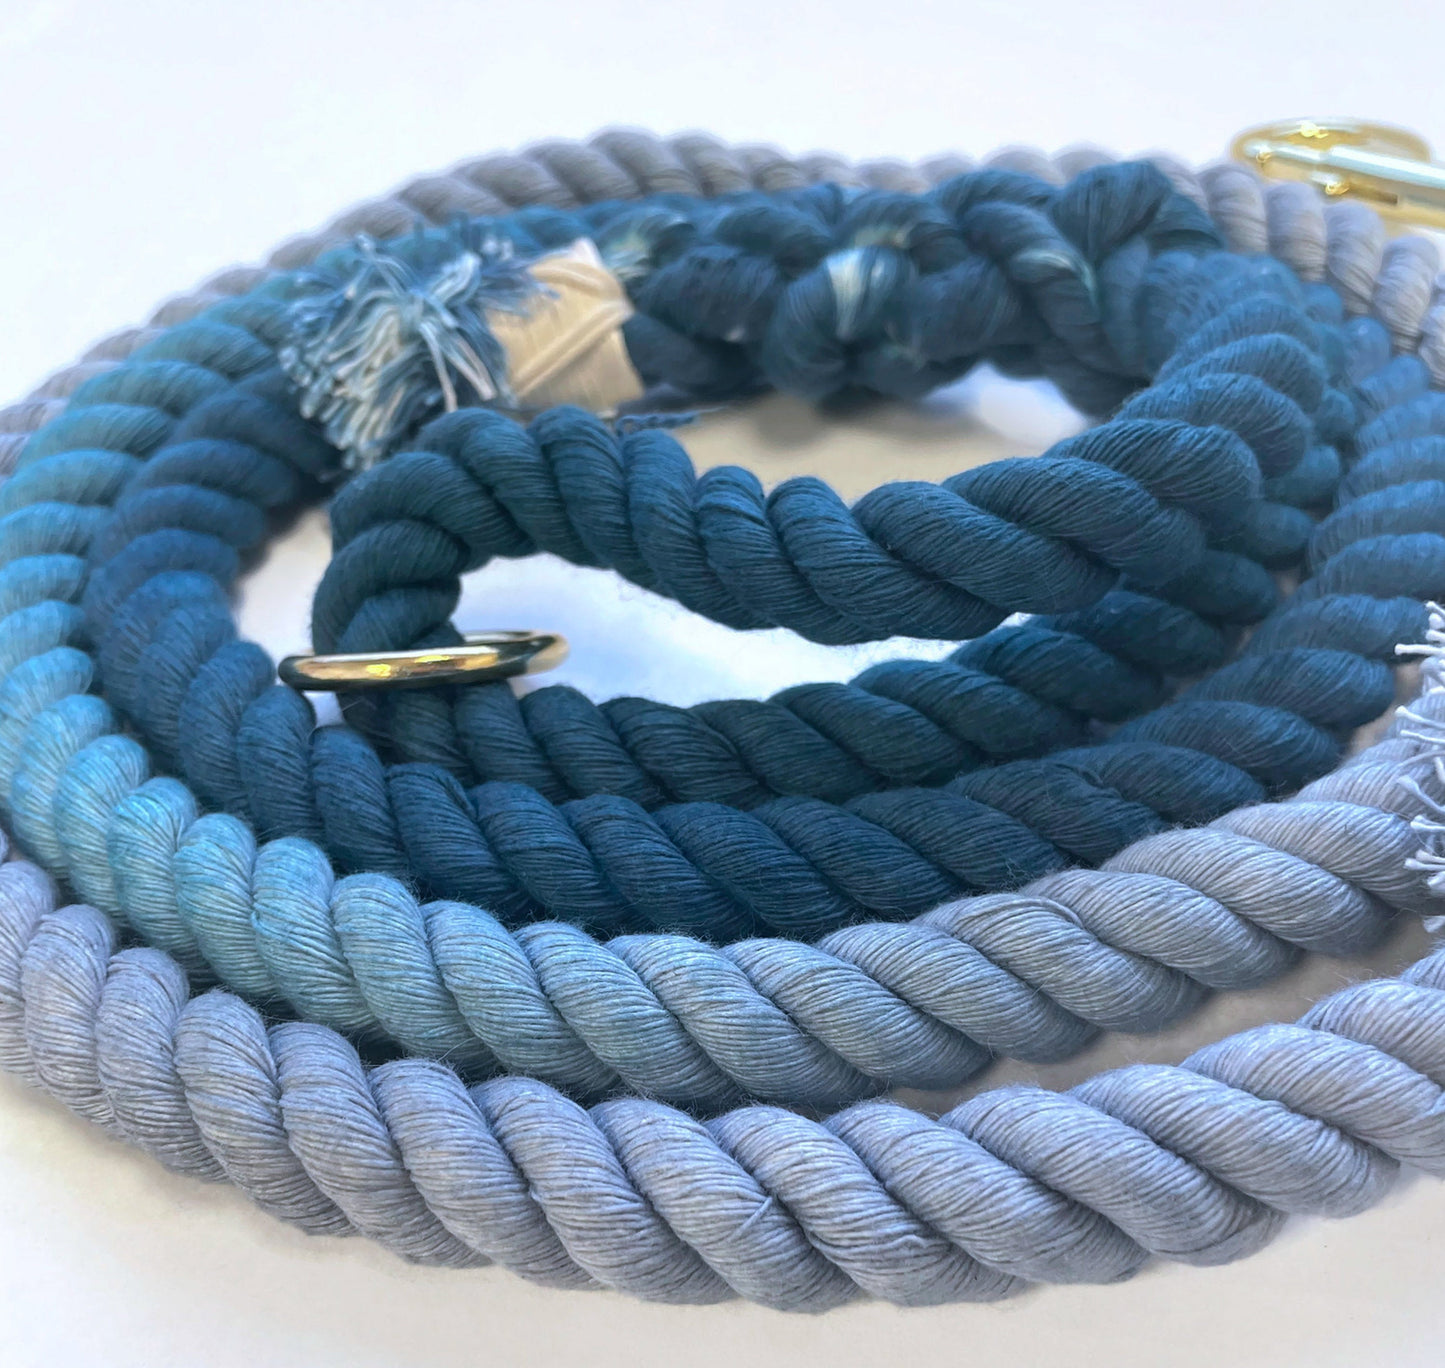 Ombré Blue Cotton Rope Leash - Cute Dog Leash - Dog Gift - Gift for Her - Pet Birthday Gift - Dog Accessory - Dog Lover Gift - Wedding Leash